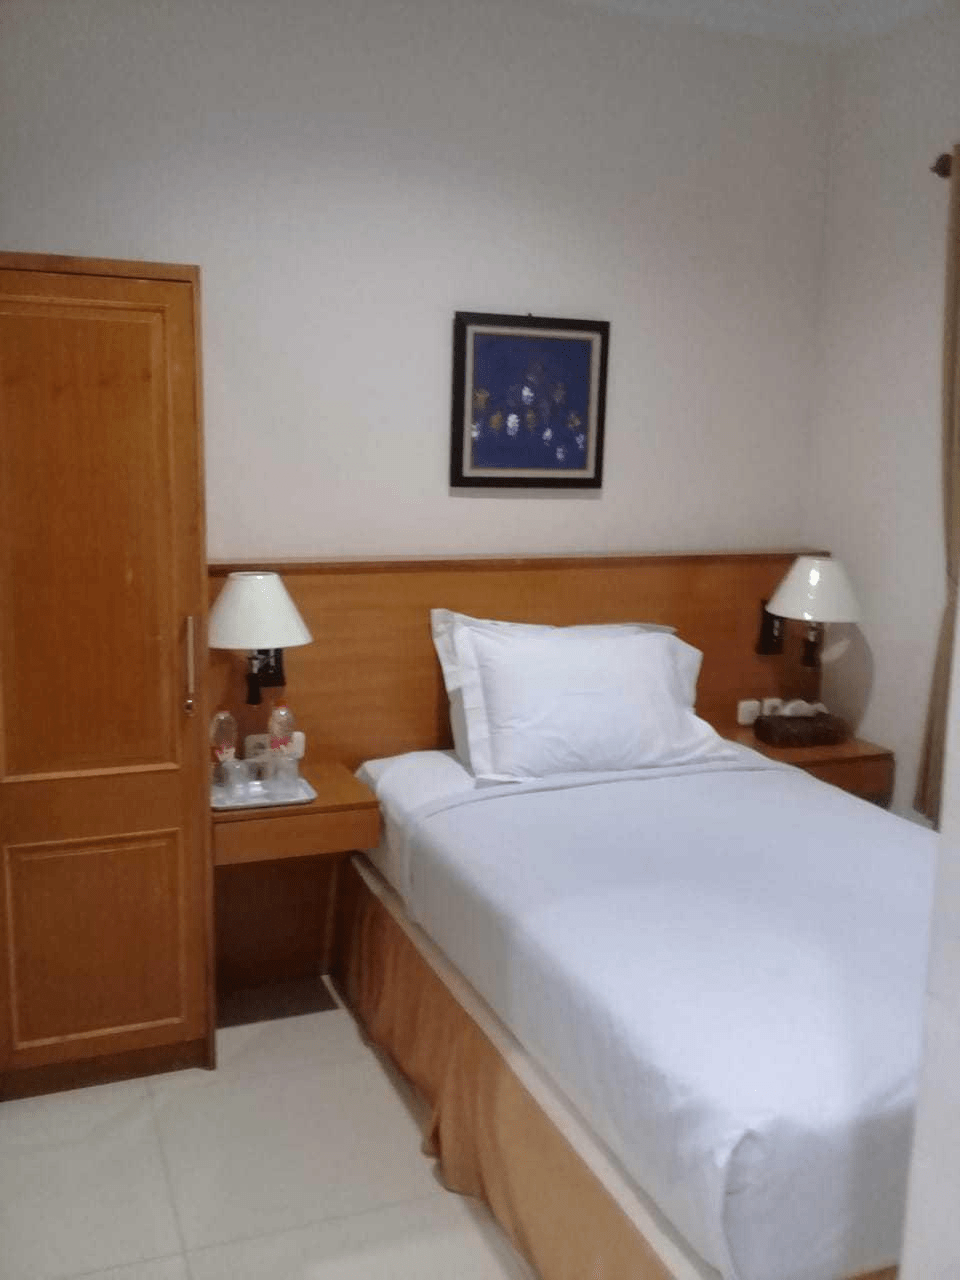 Bedroom 2, The Priangan Boutique Hotel, Ciamis